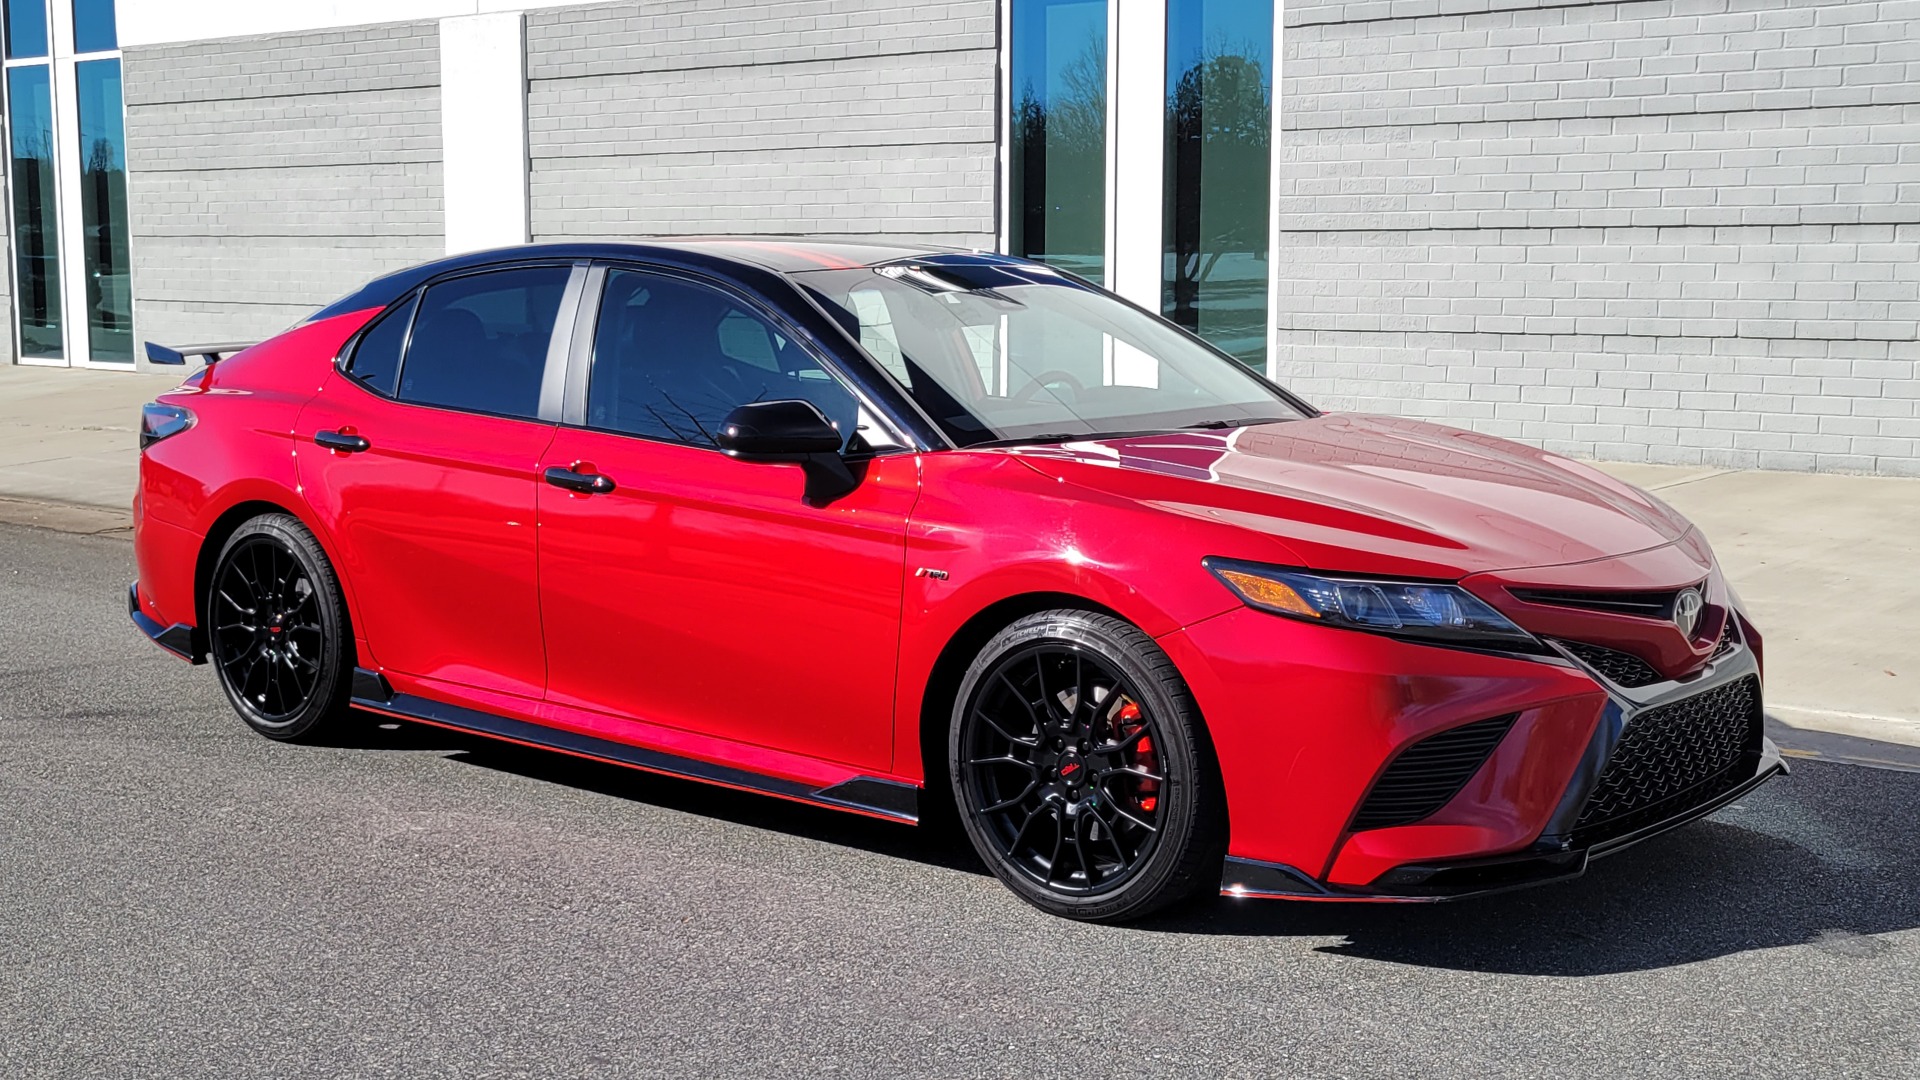 Used 2020 Toyota CAMRY TRD 3.5L V6 SEDAN / 8-SPEED AUTO / CLOTH SEATS / REARVIEW for sale $35,995 at Formula Imports in Charlotte NC 28227 10